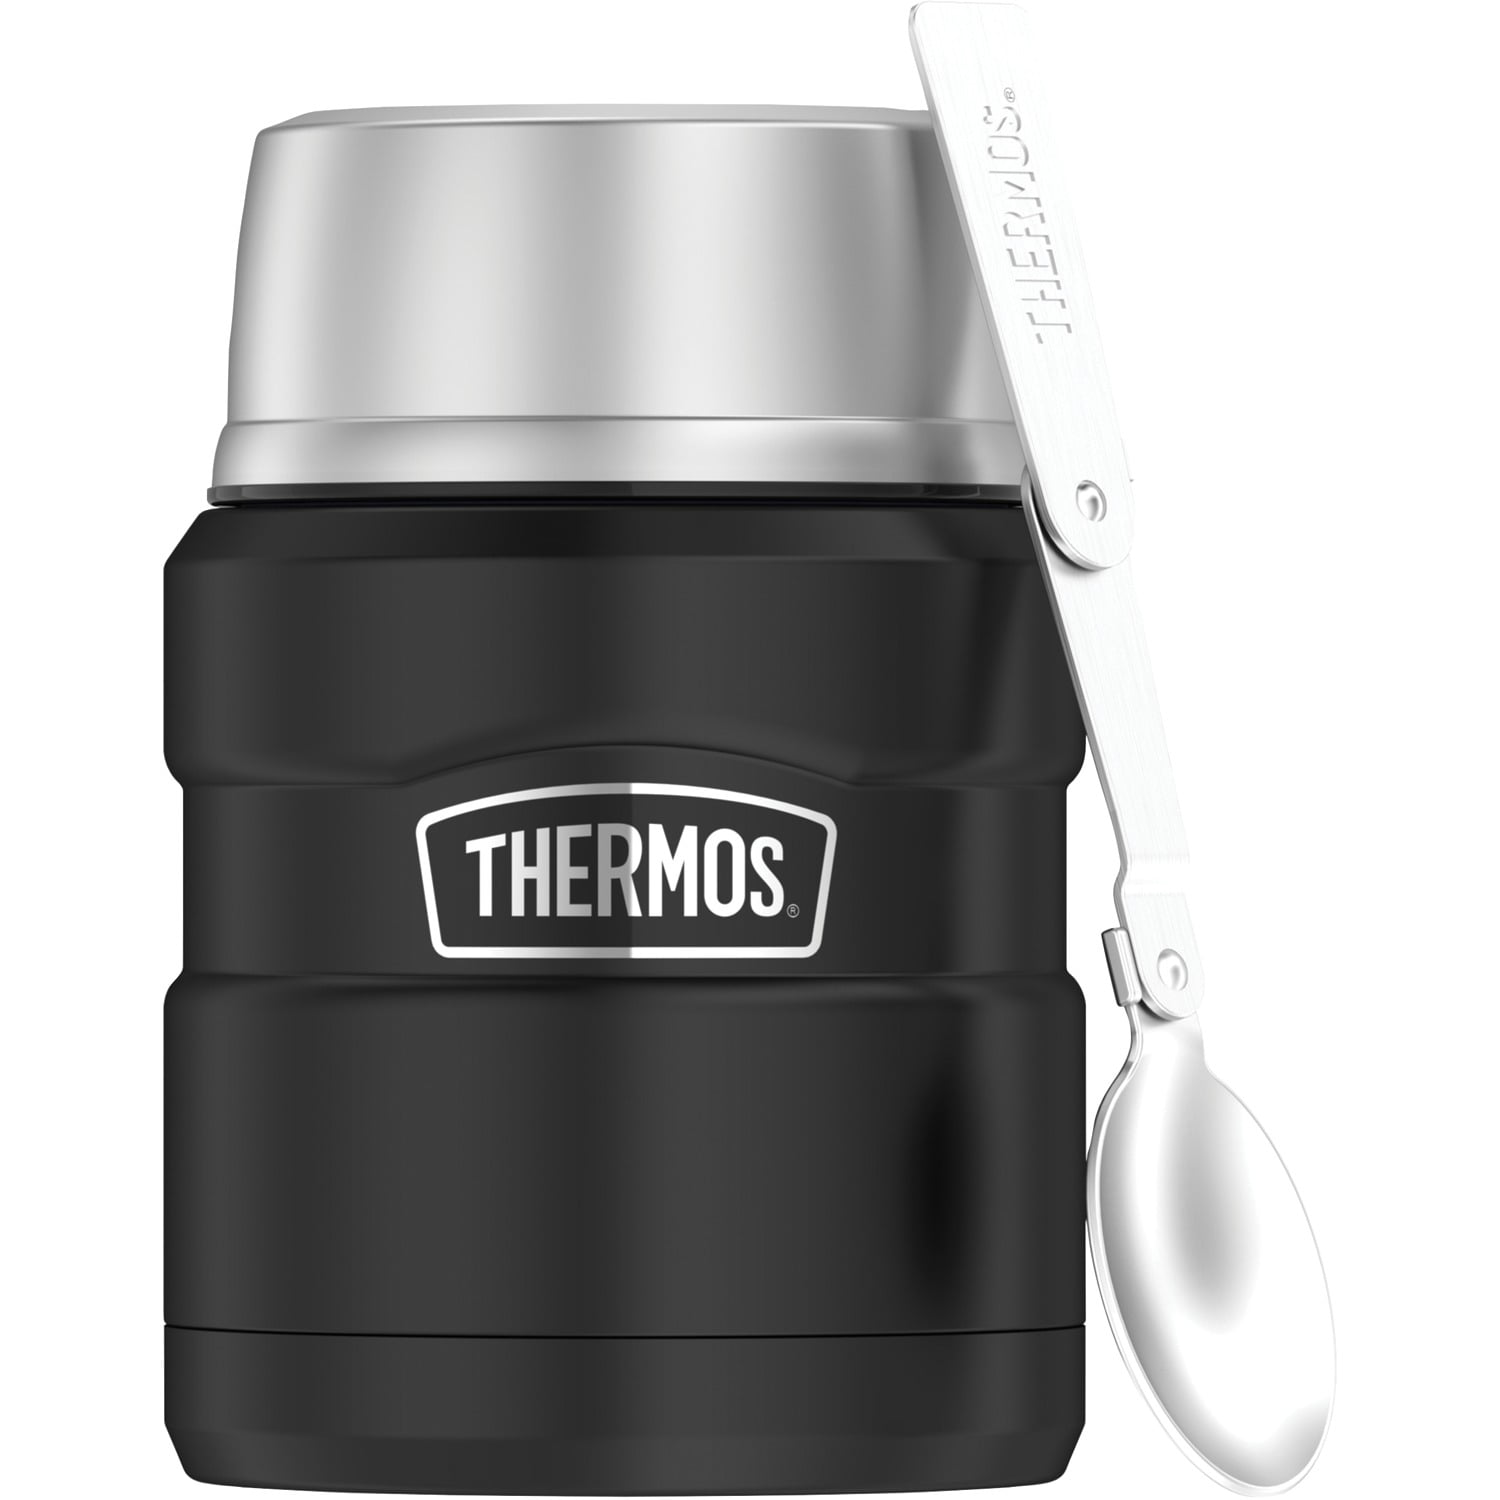 SSAWcasa Thermos for Hot Food, 27oz Soup Thermos for Adults, Wide Mouth  Stainless Steel Food Thermos Jar, Insulated Lunch Container with Spoon 